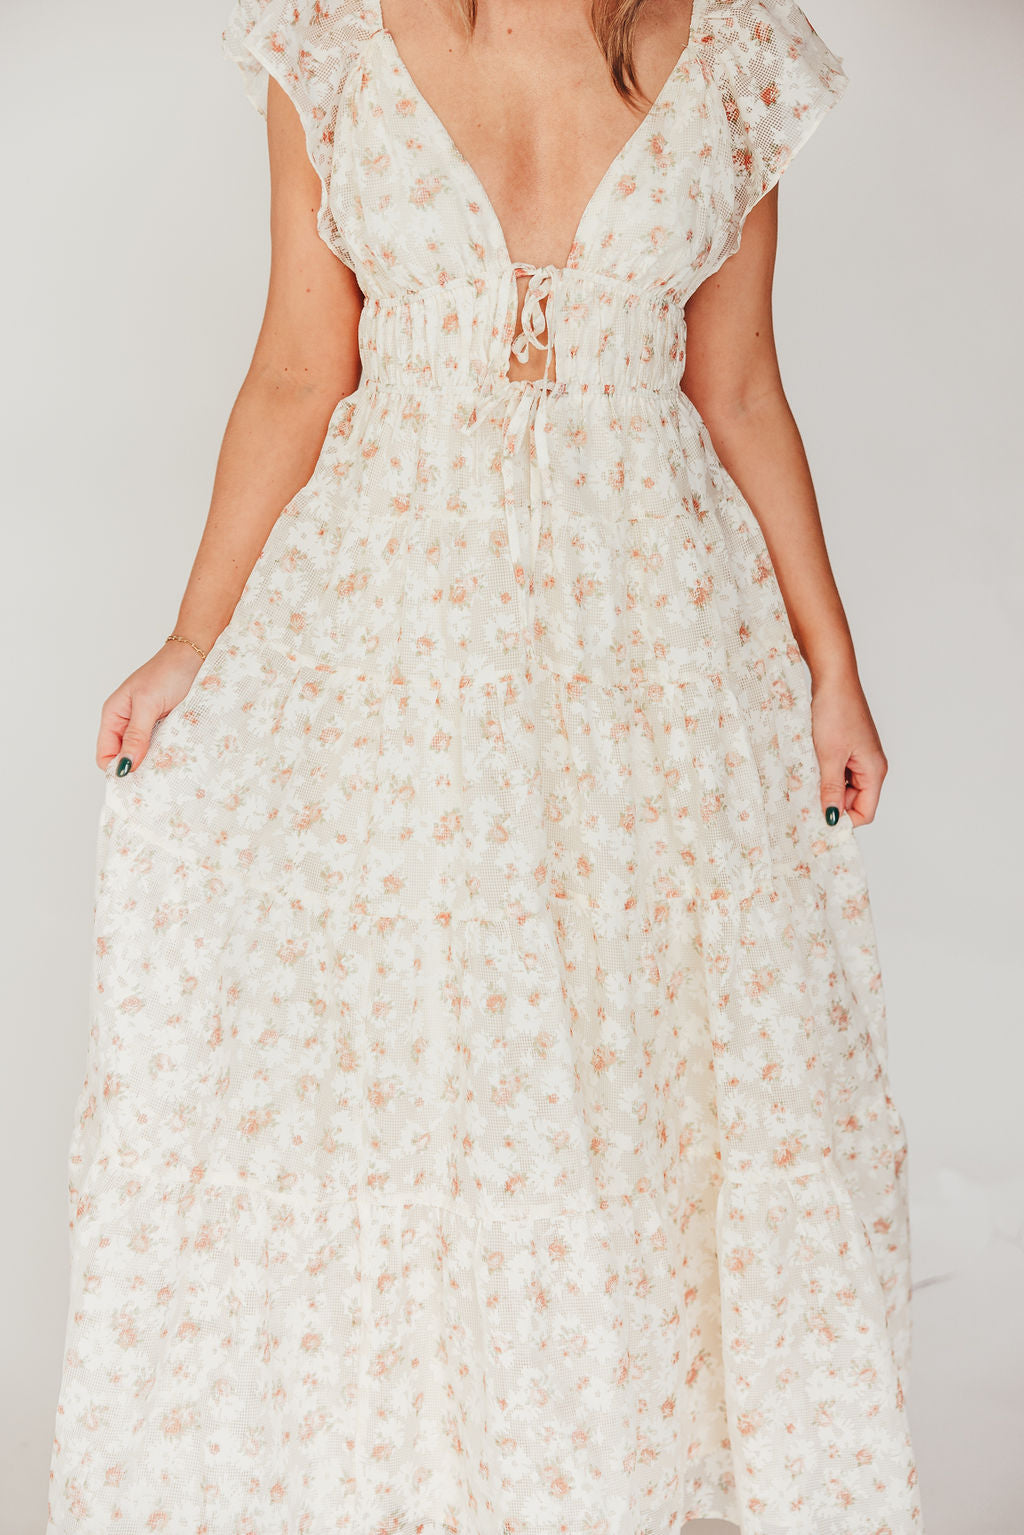 Enchanted Floral & Gingham Ruffled Maxi Dress in Cream/Peach (Restocking in May)